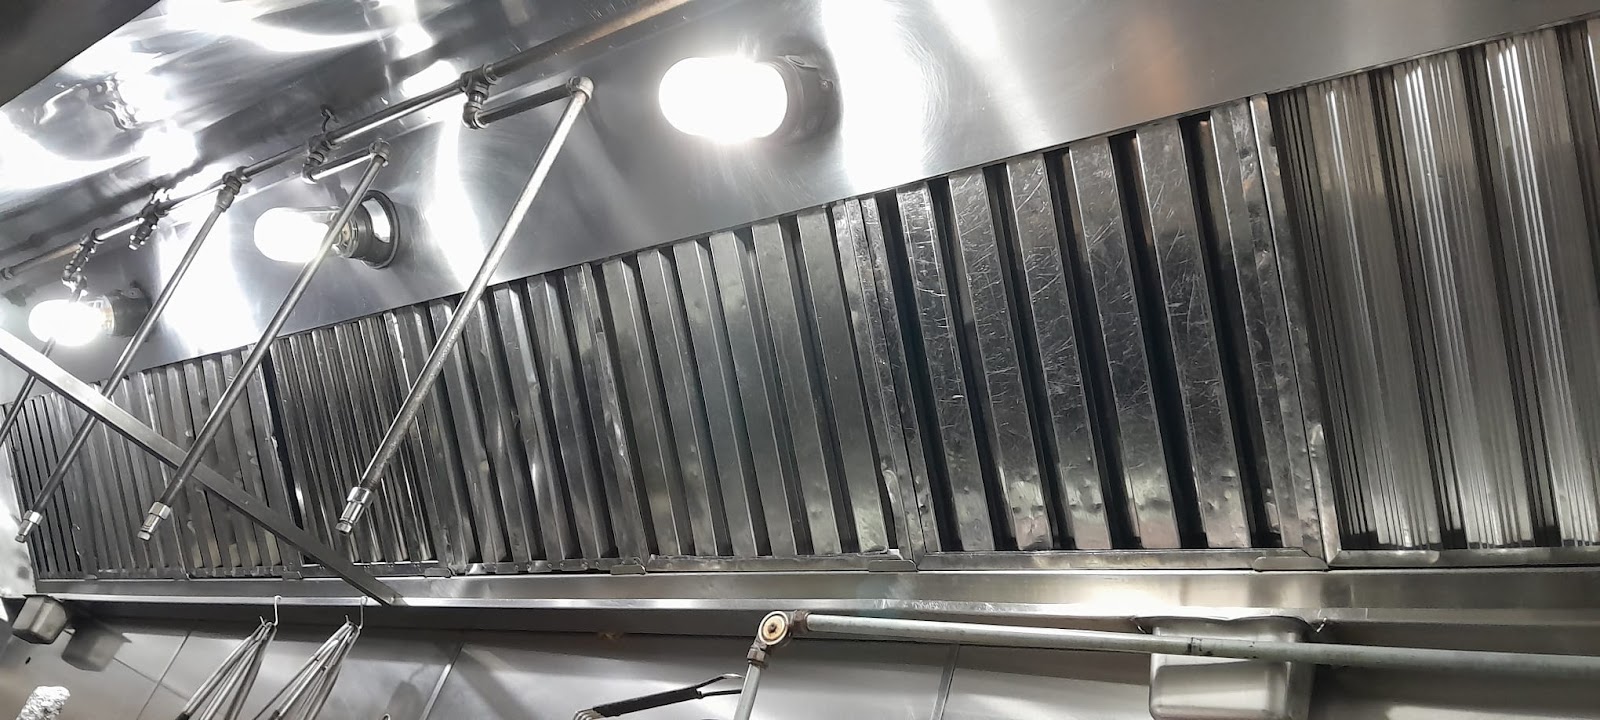 Kenny Handy Service- Exhaust Hood and Vent Cleaning Services